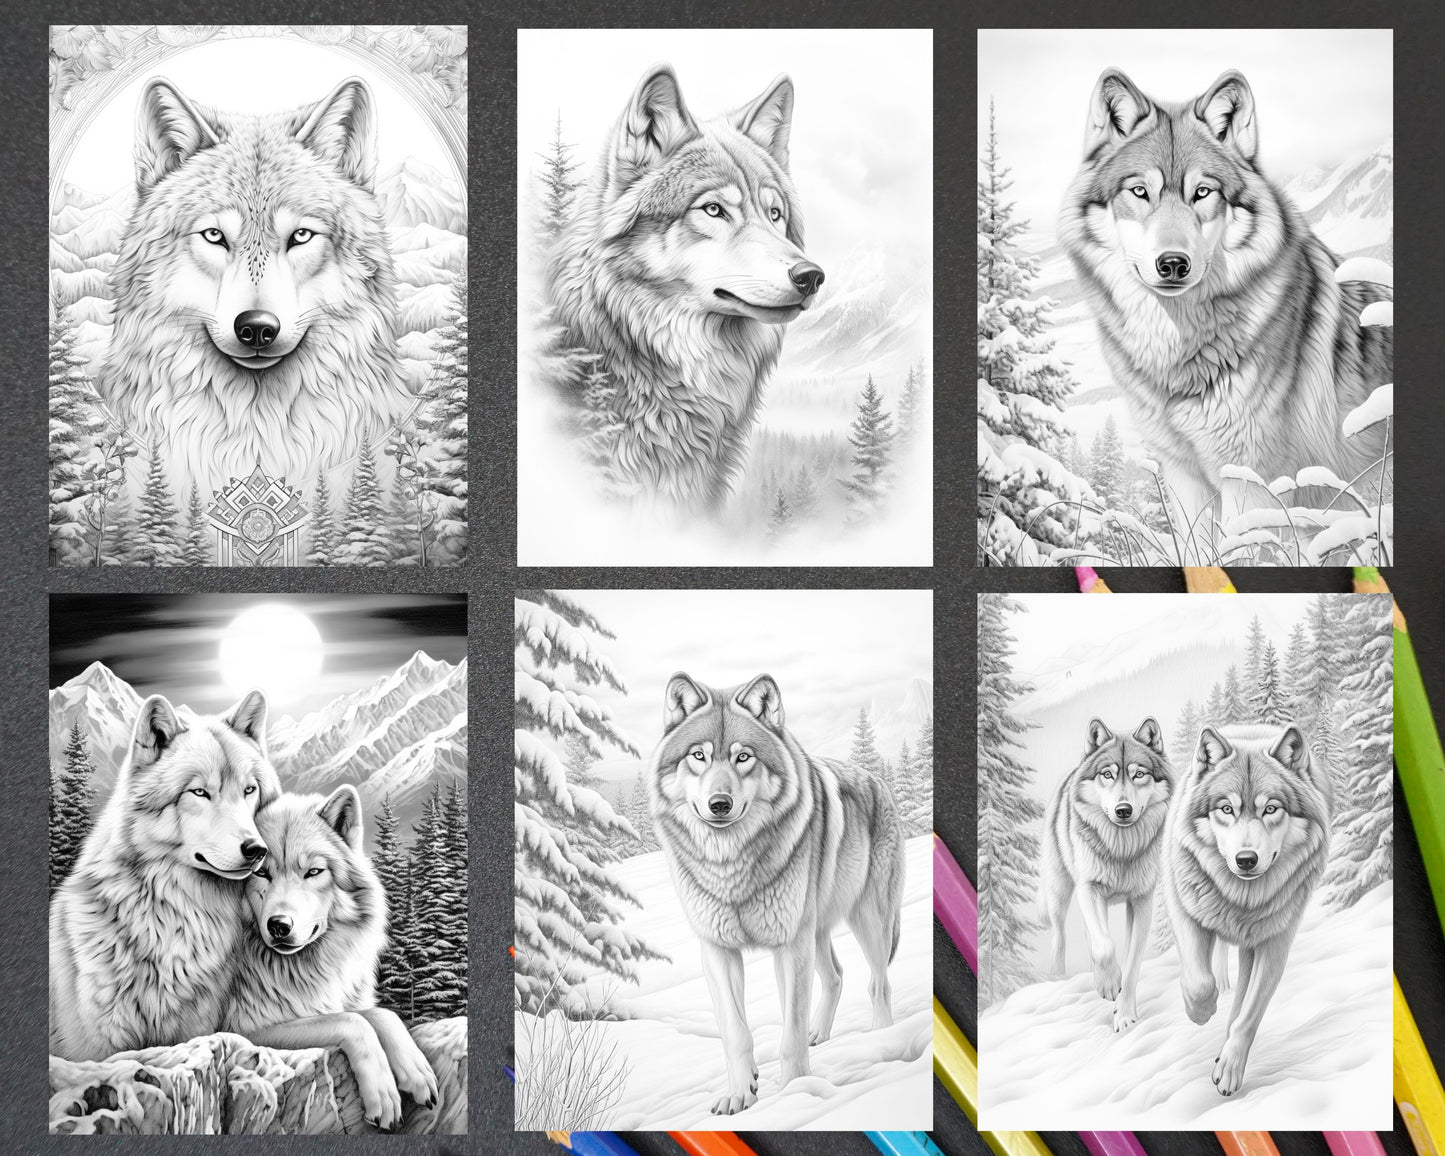 Winter Wolf Grayscale Coloring Page, Printable Adult Coloring Sheet, Arctic Animal Coloring Pages, Wolf Coloring Book Printable, Snowy Wildlife Coloring Page, Stress Relief Activity, Winter Forest Animals Coloring Pages, DIY Coloring Project, Relaxing Coloring Activity, Animal Coloring Sheets, Winter Coloring Pages